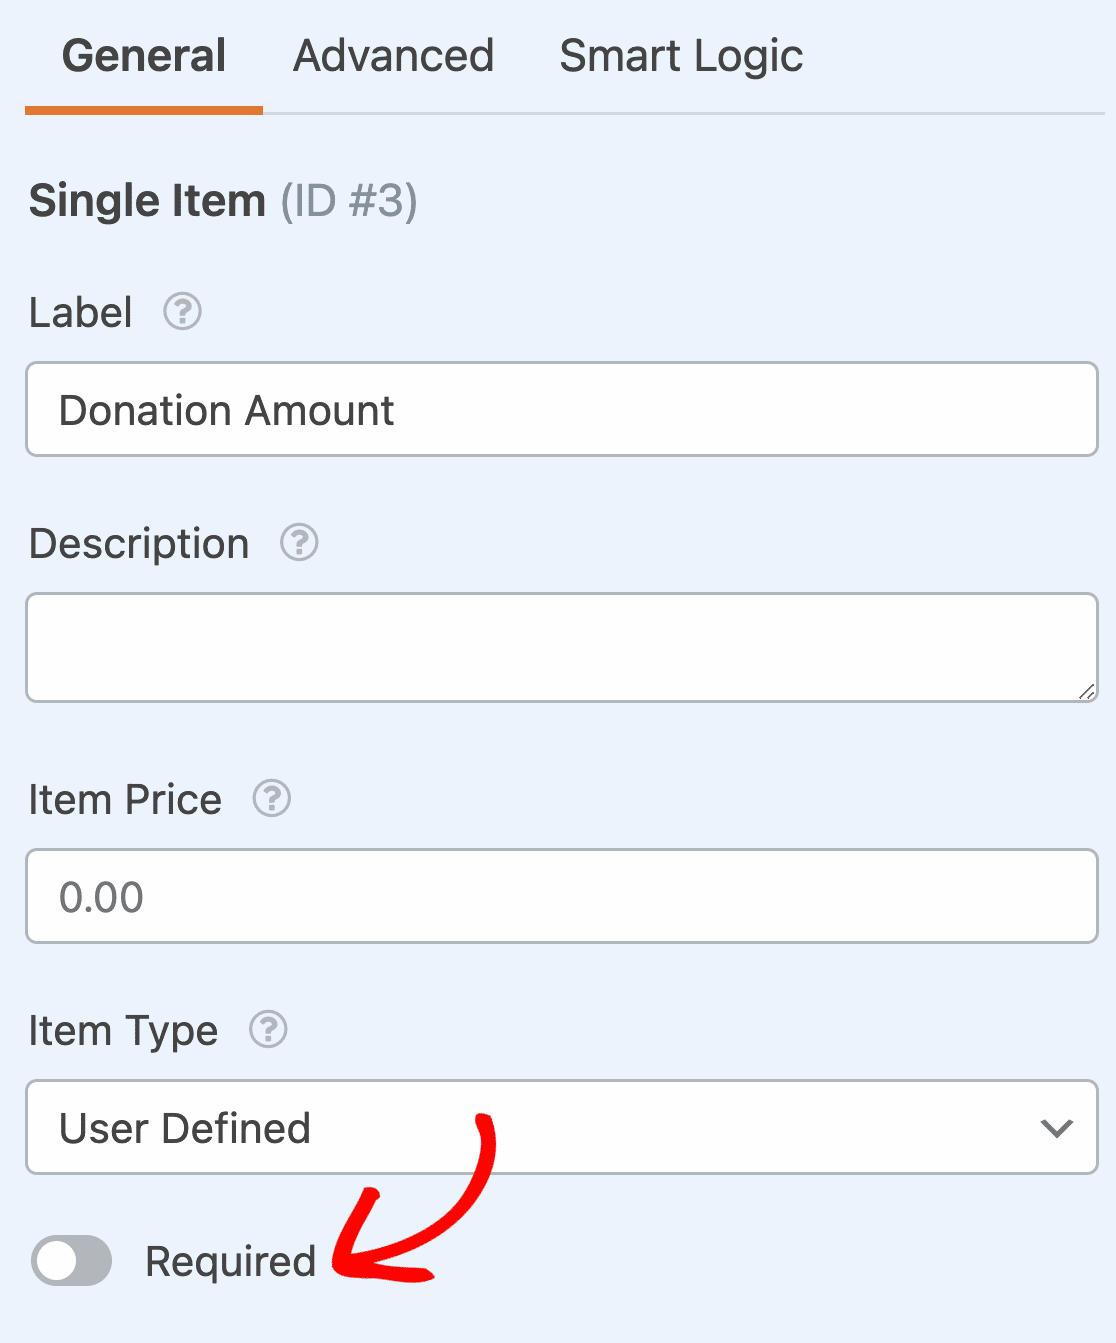 Making the donation amount field not required